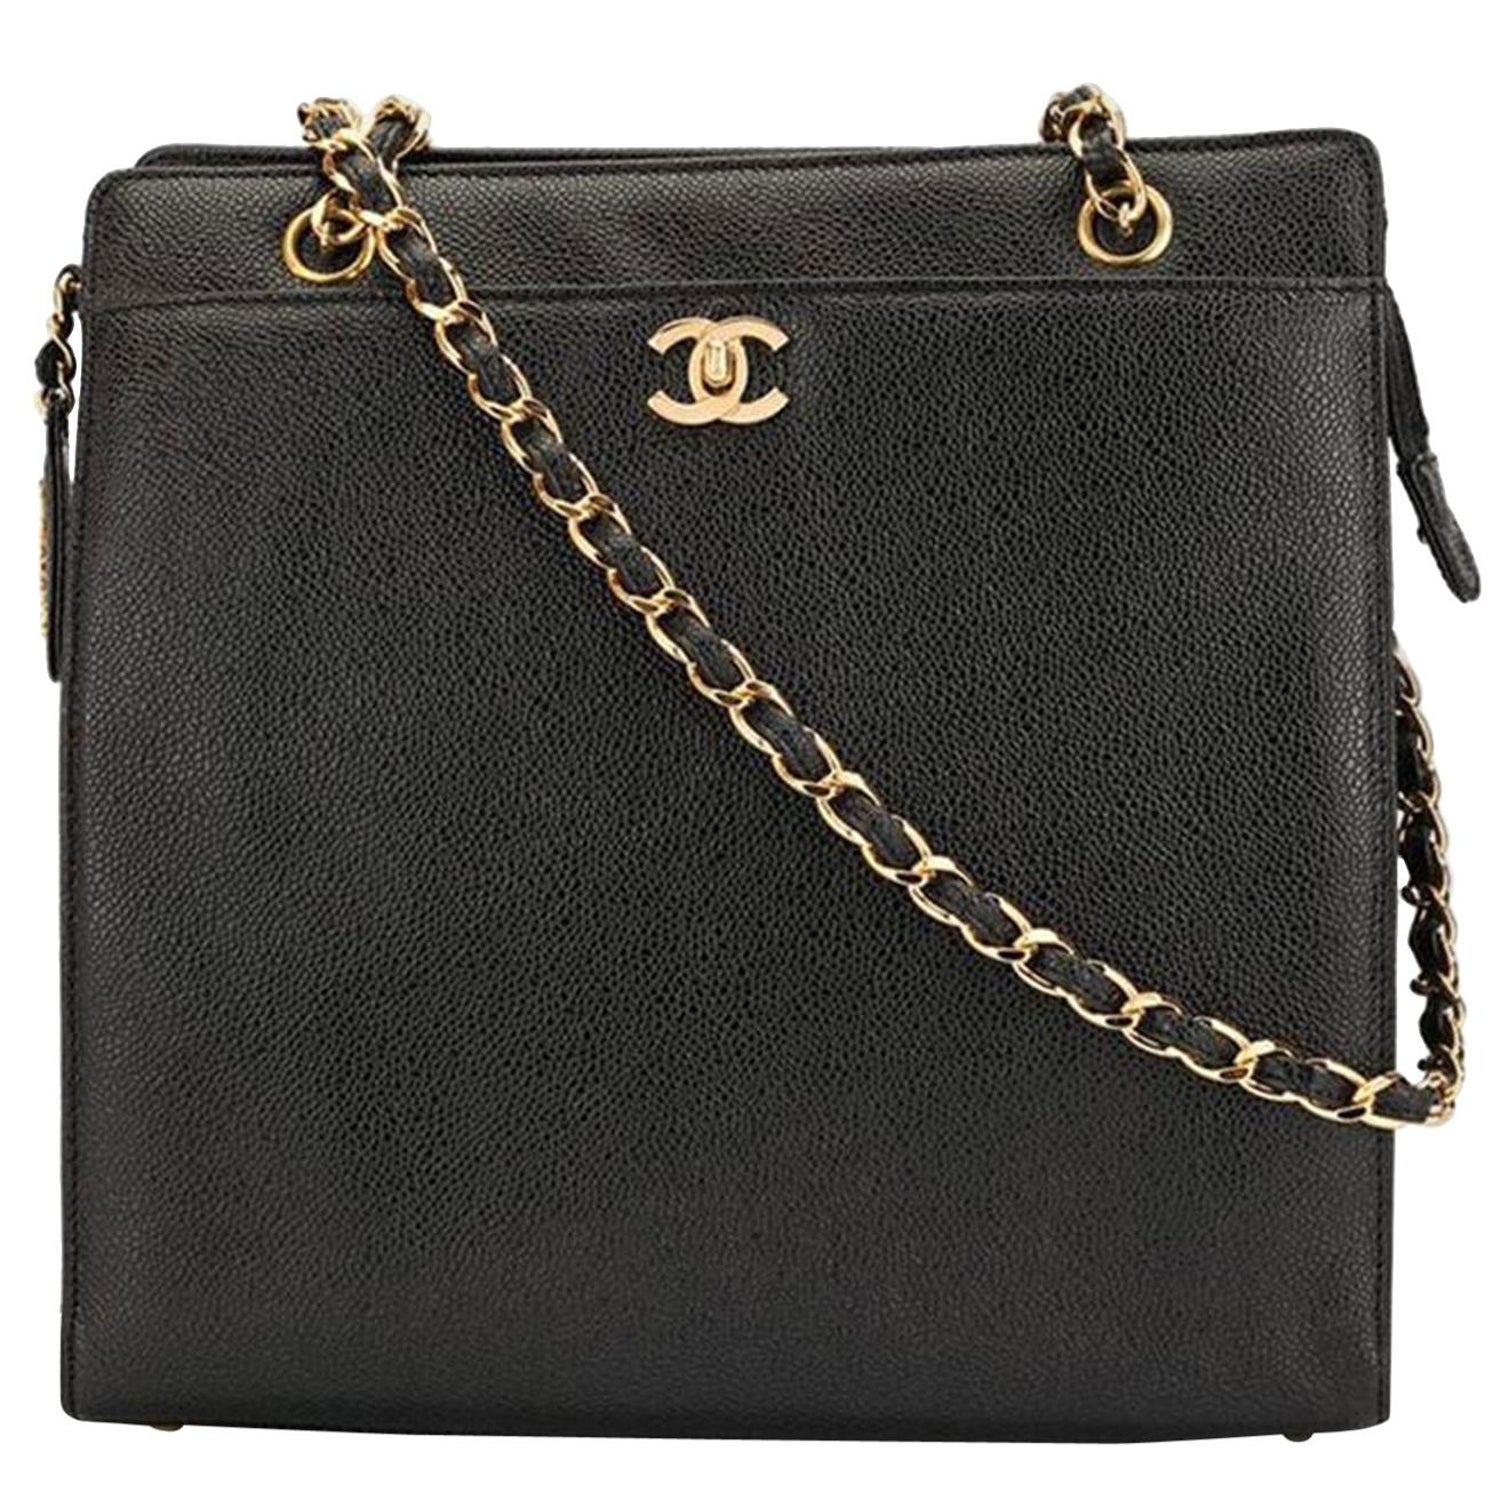 Chanel Classic Flap Travel Airline Airport 2016 Runway Top Handle